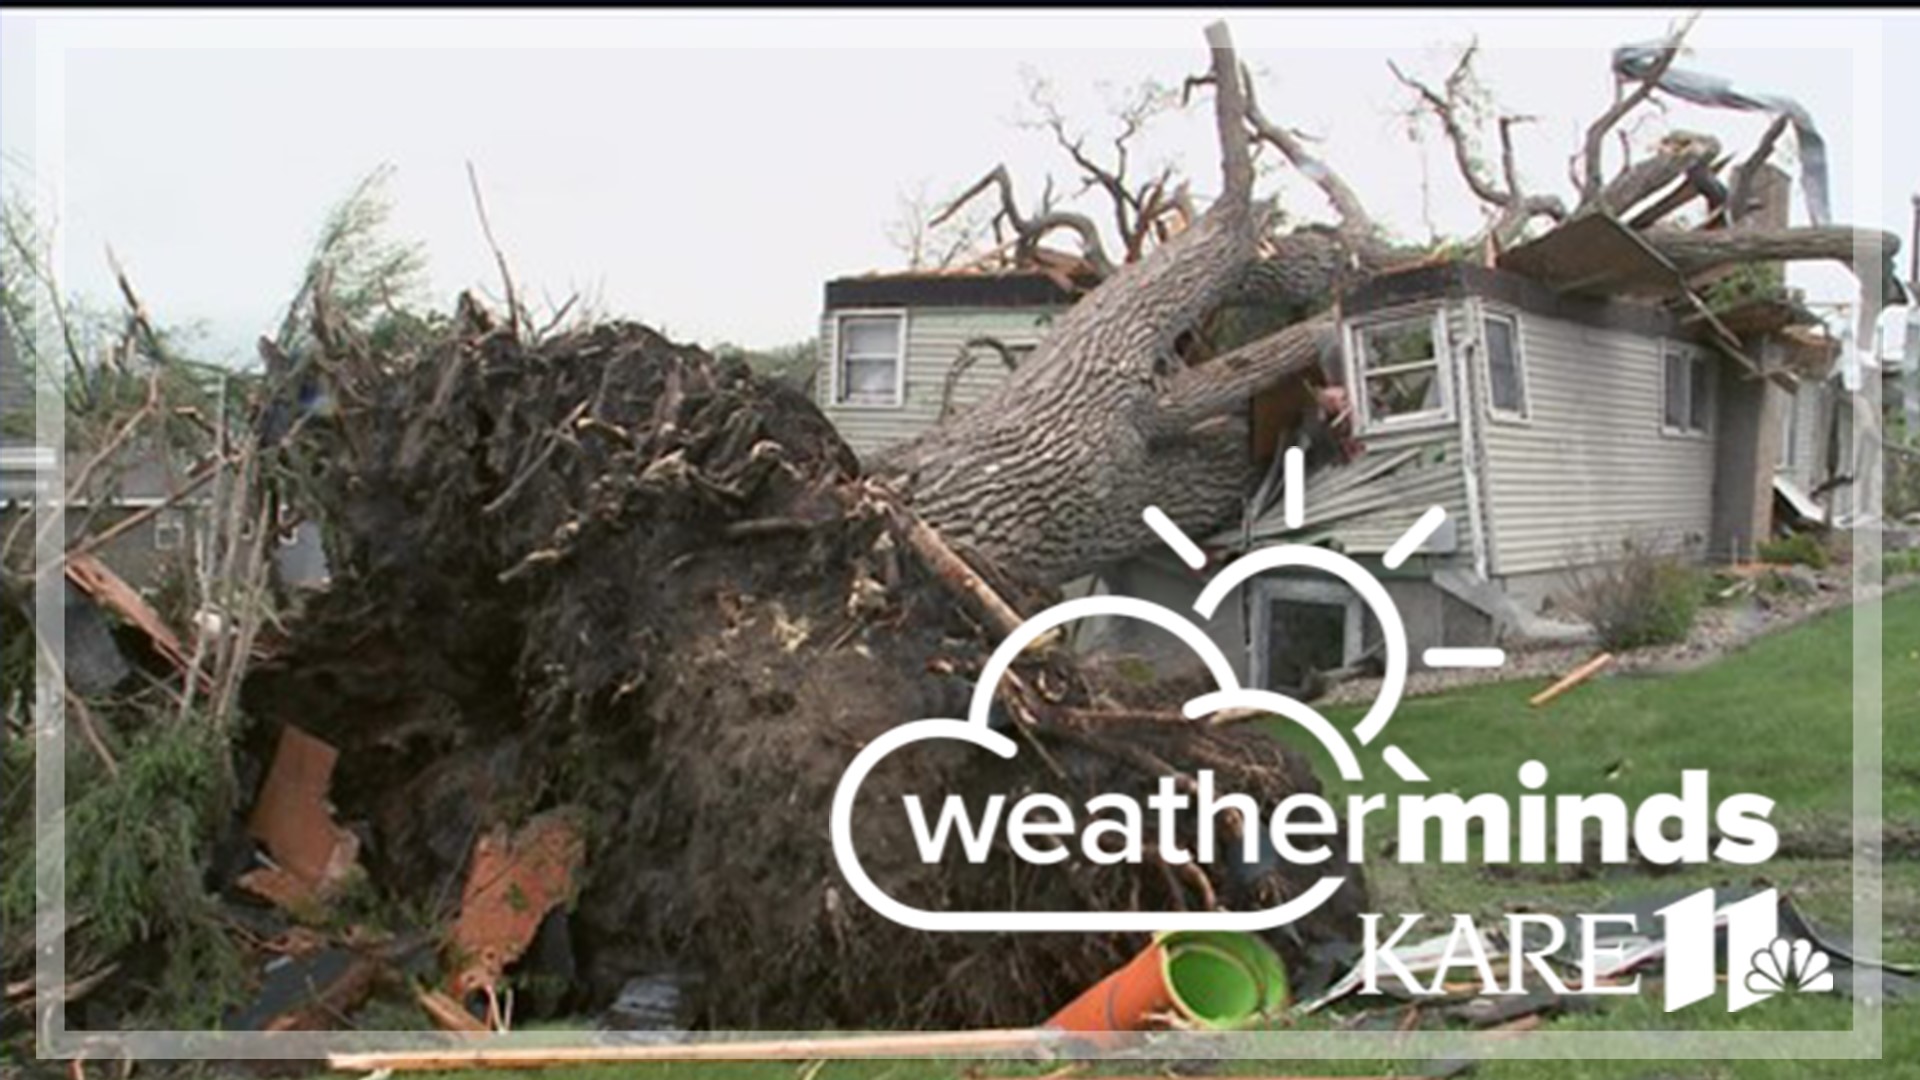 KARE 11 Meteorologist Ben Dery explains how many tornado watches Minnesota has had so far this year, how many were confirmed and how the state compares to others.